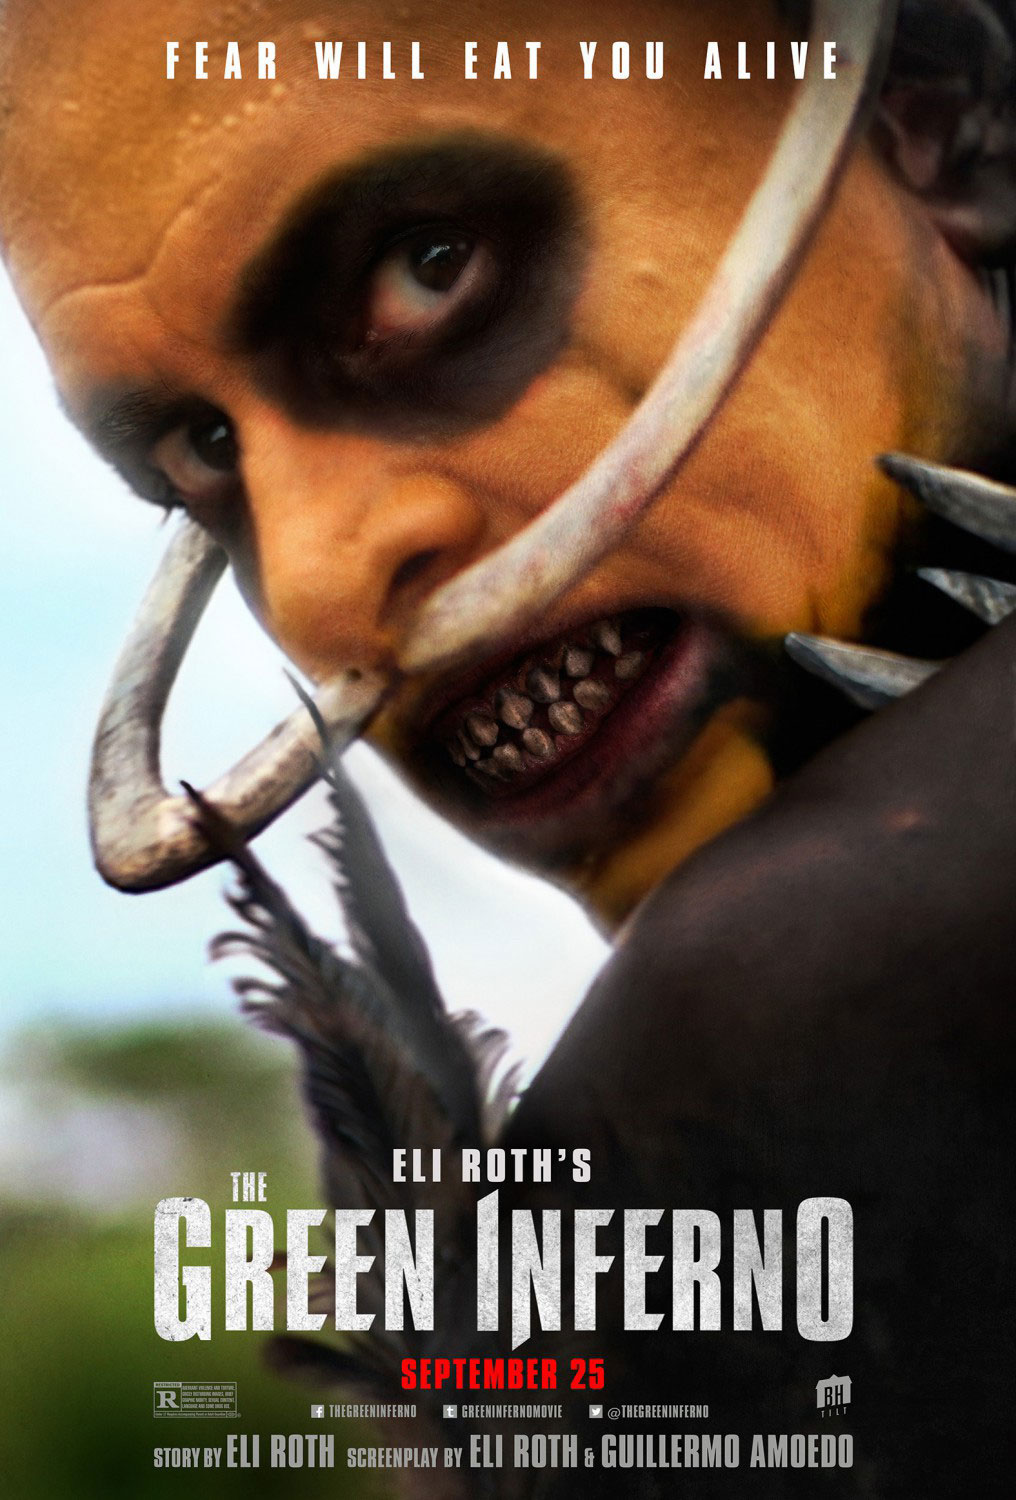 The Green Inferno (2013) movie poster